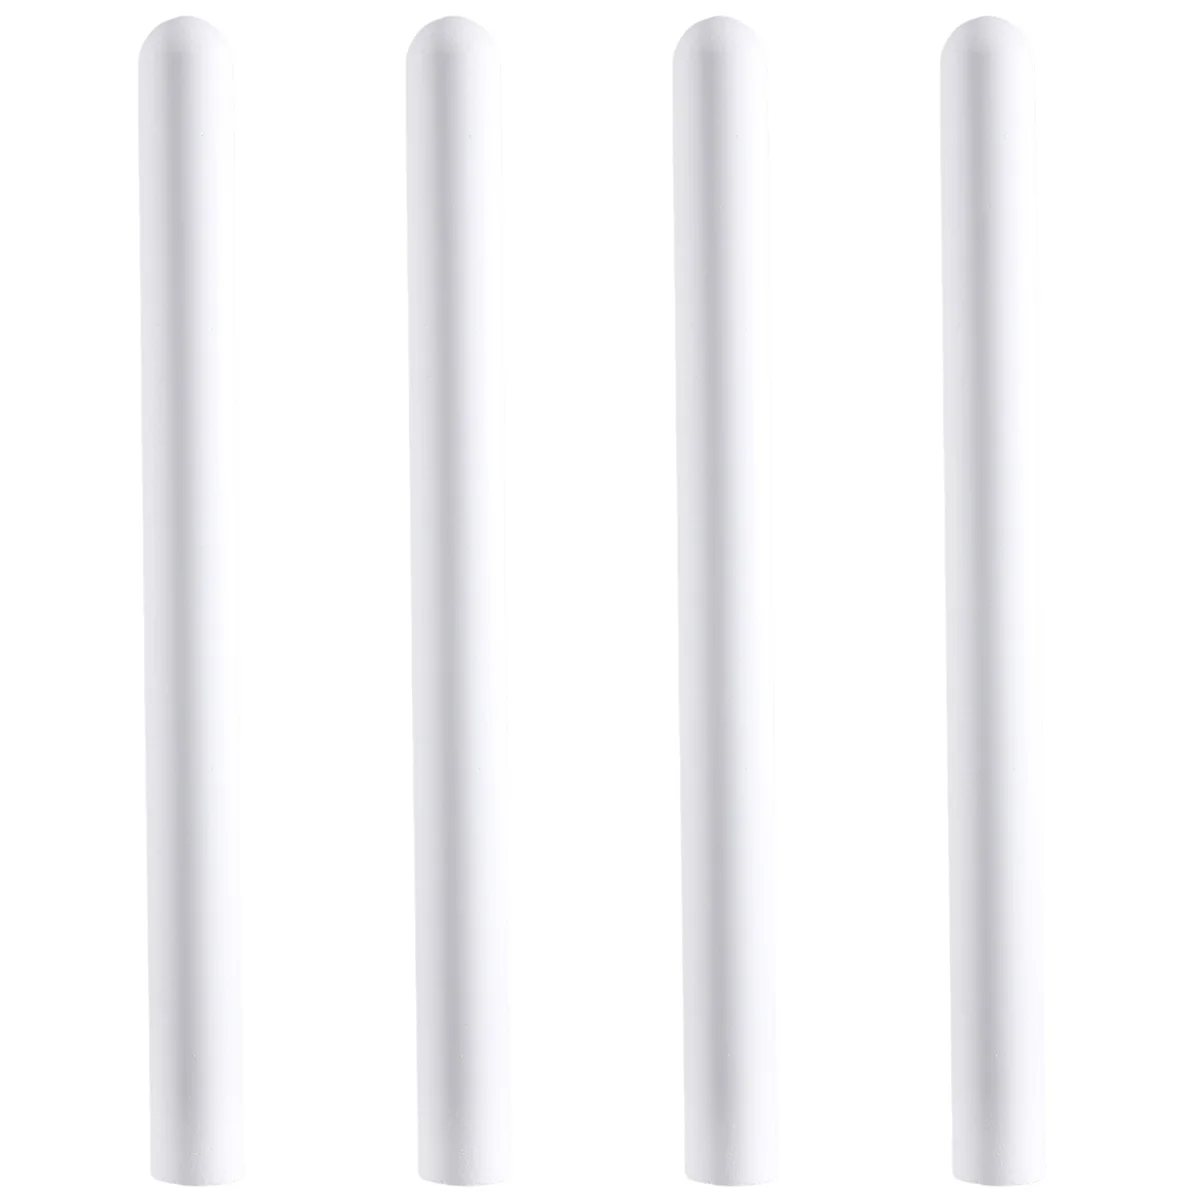 

4Pc Drying Rod Stick Diatomite Moisture Absorbing Stick Clean Water Absorption Rod Diatomite Earth Desiccant for Laundry